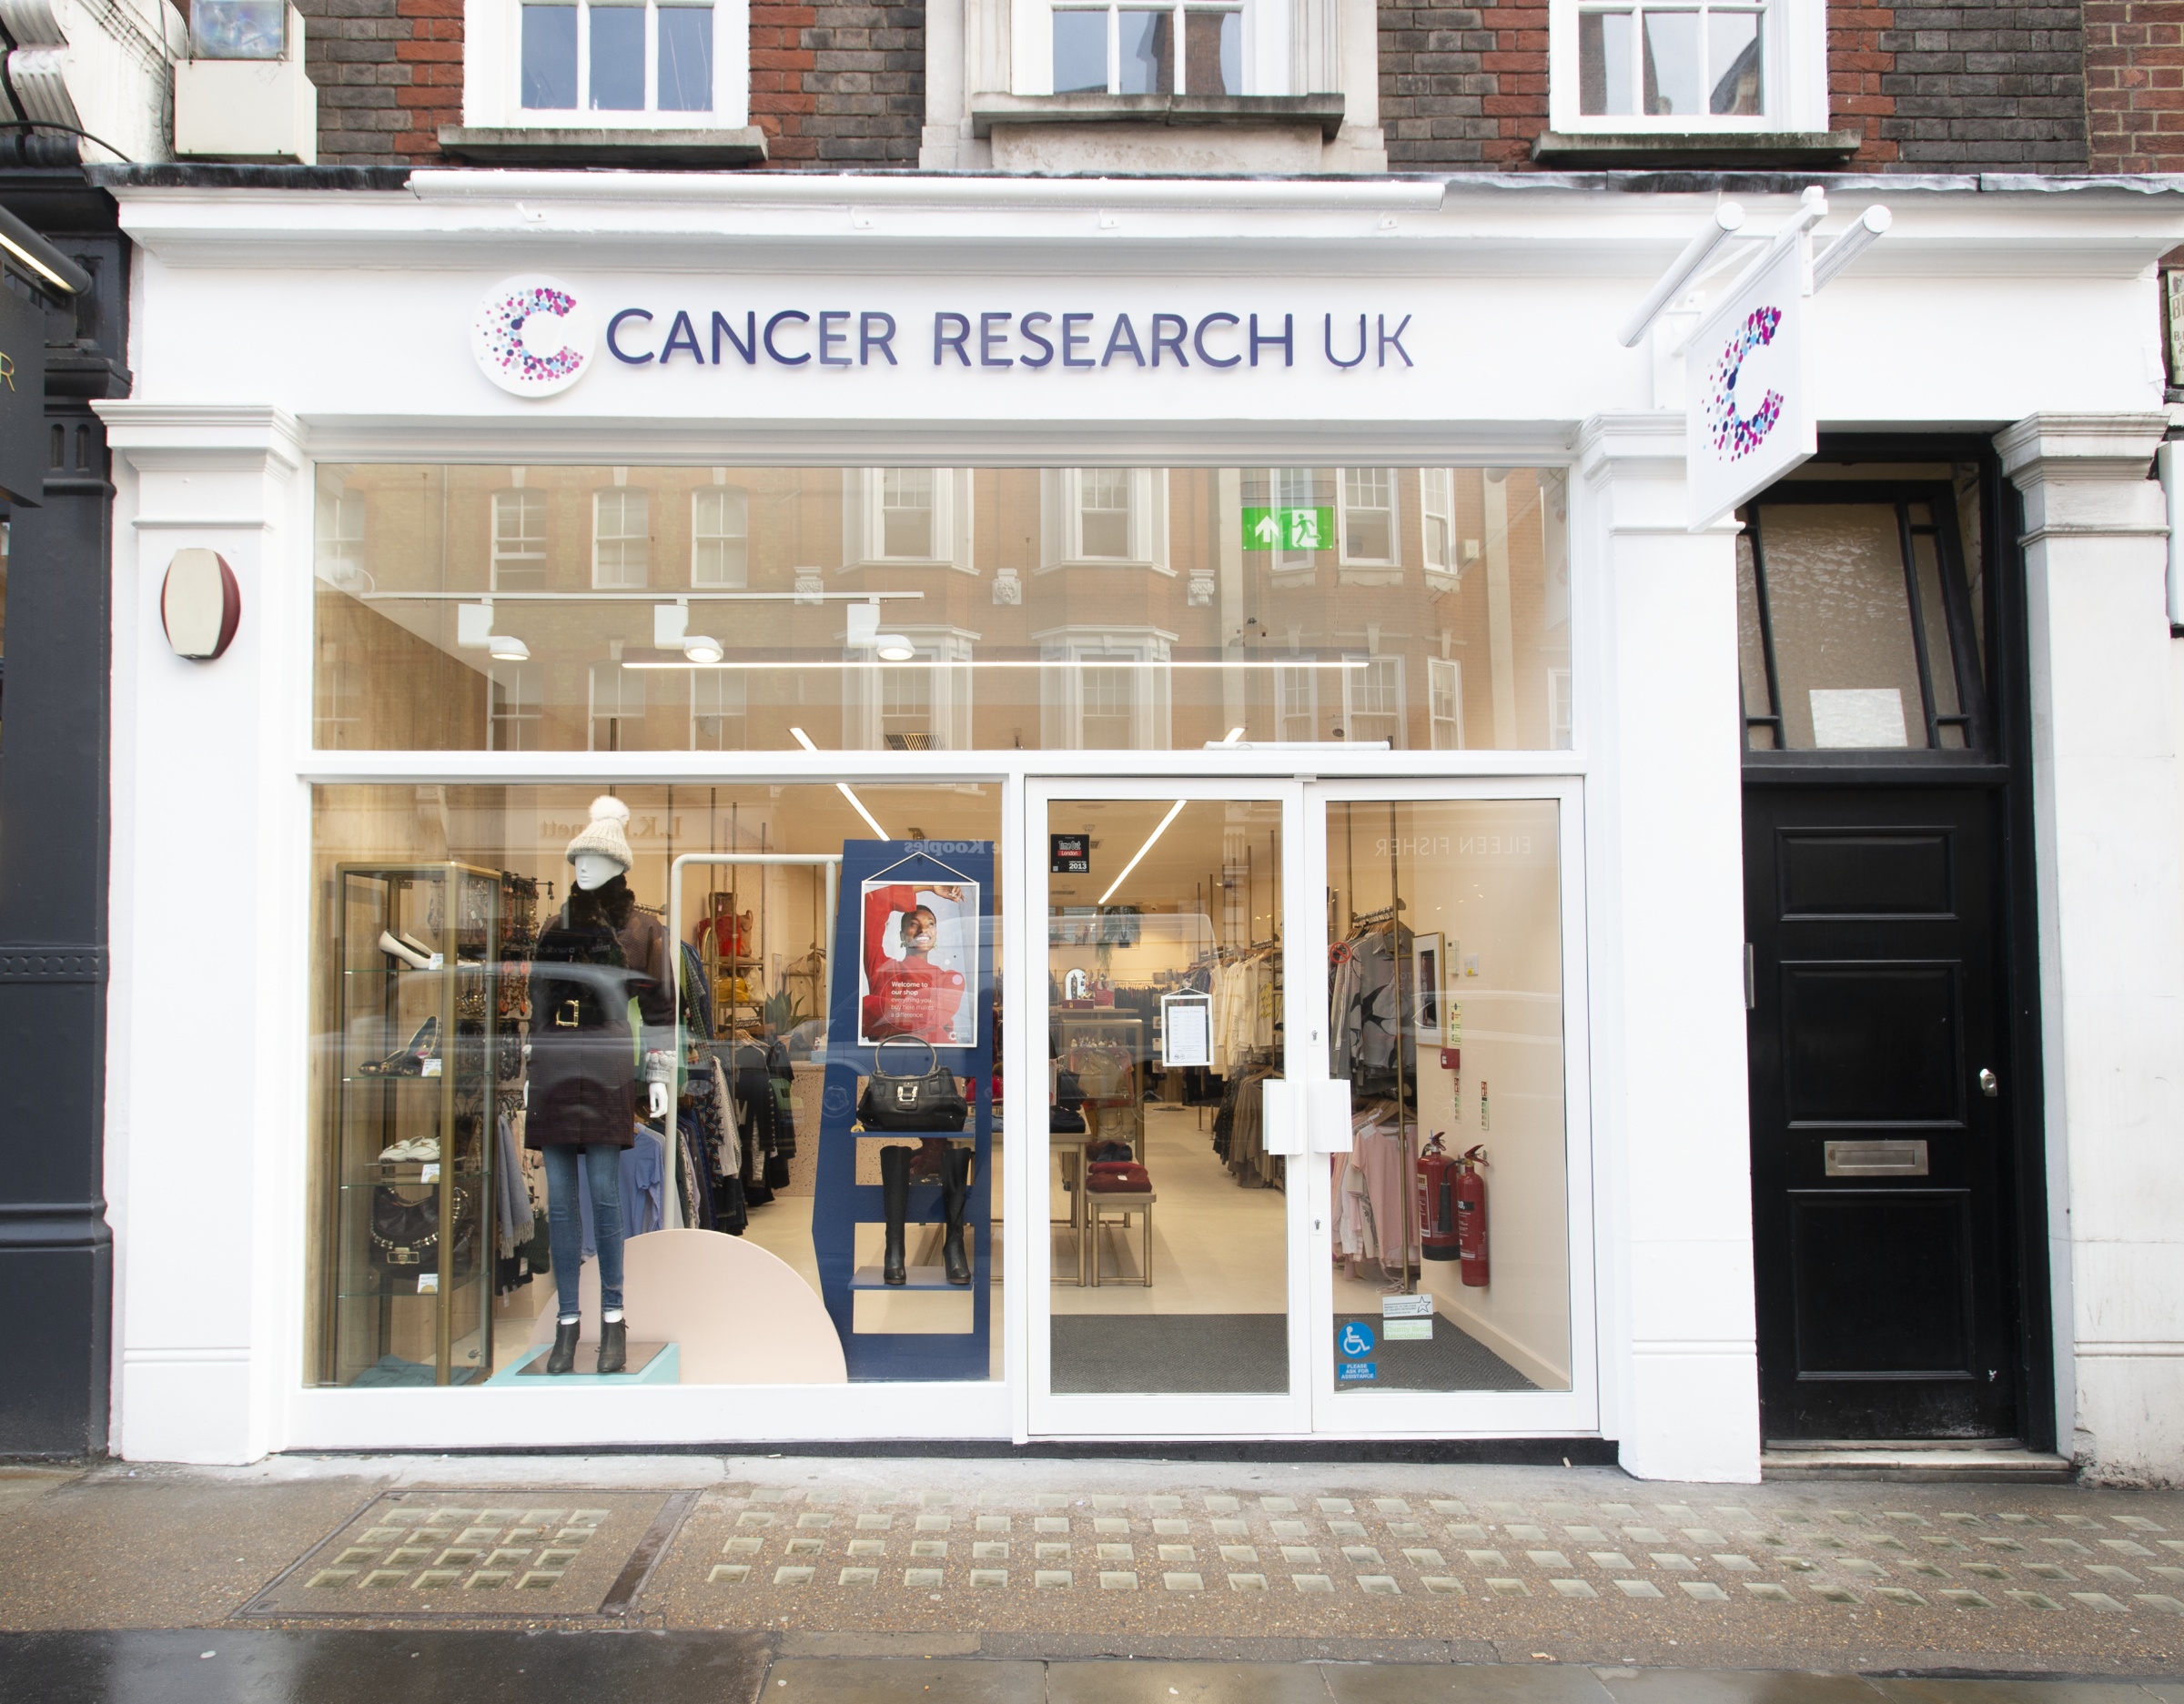 new cancer research shop westwood cross